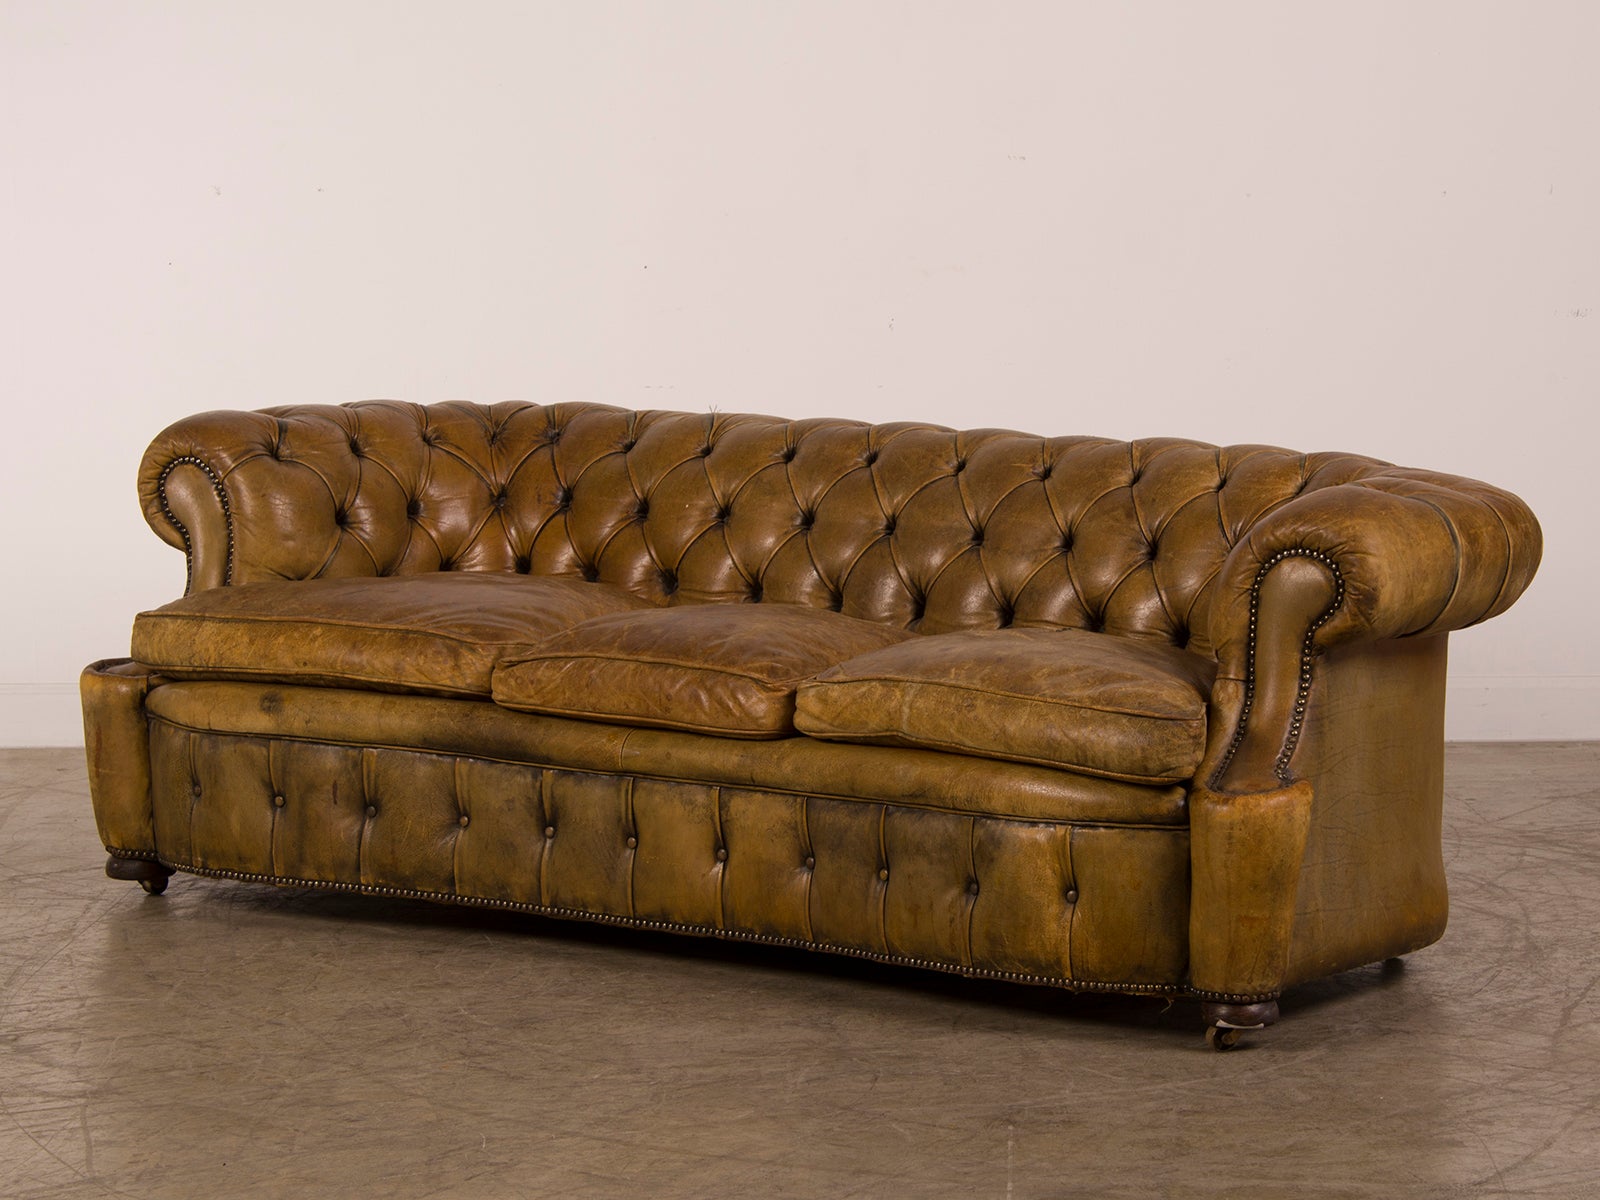 A Chesterfield sofa with a serpentine shape from England c.1920